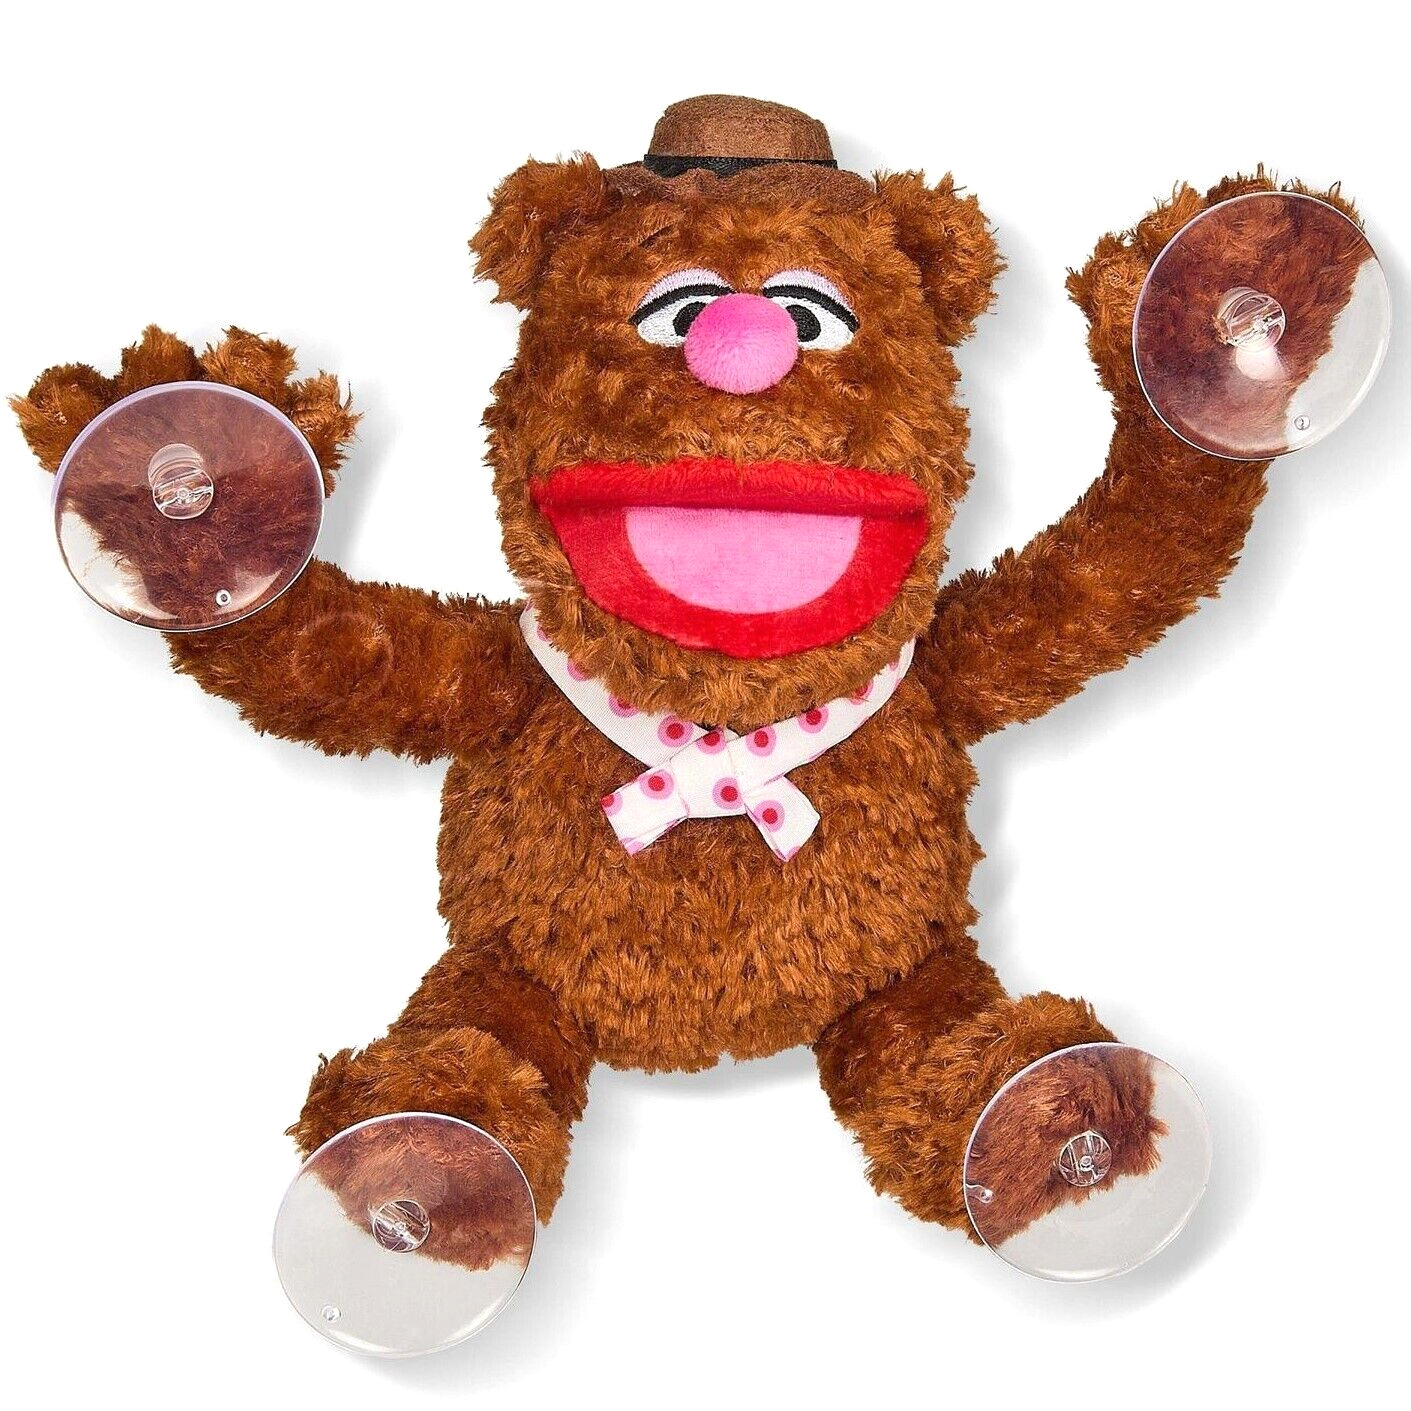 ✿ New FOZZIE BEAR Stuffed Plush CAR WINDOW SUCTION CUPS Clinger Toy MUPPET SHOW